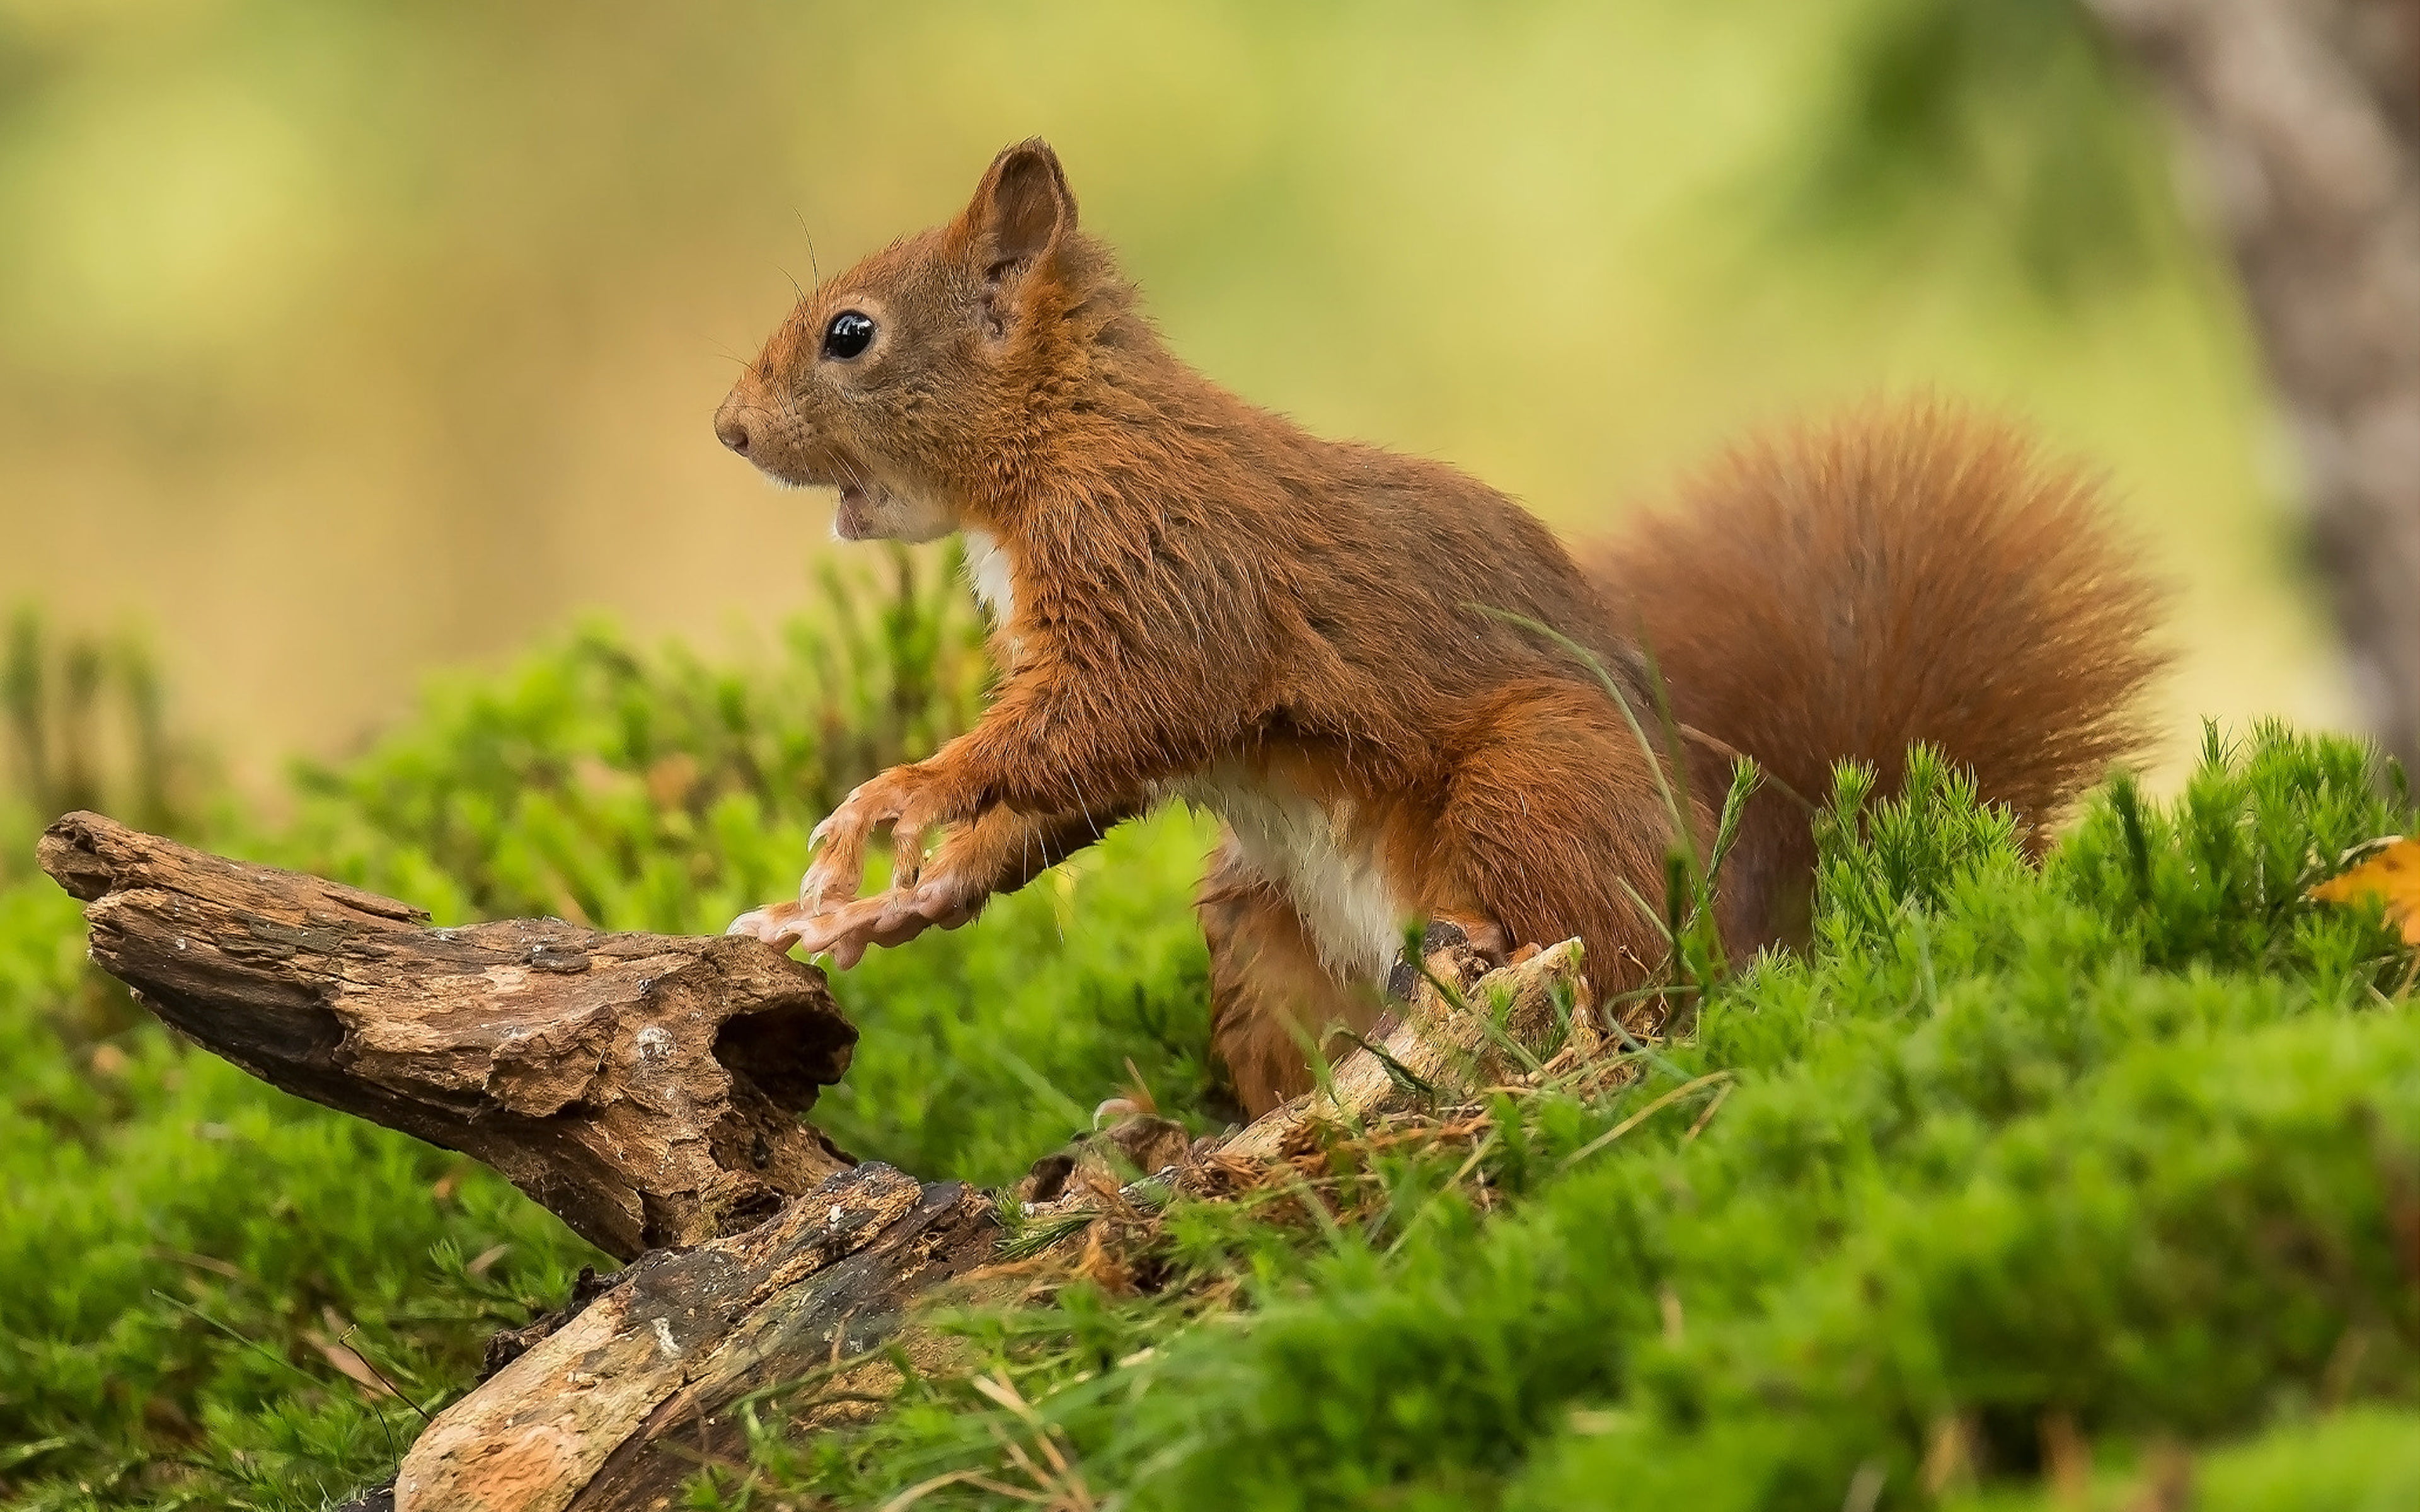 Animals Rodent Red Squirrel Kind Of Squirrel In Gen Sciurus That Is Honored Across All Eurasia Desktop Wallpapers Hd For Mobile Phones And Laptops 3840×2400